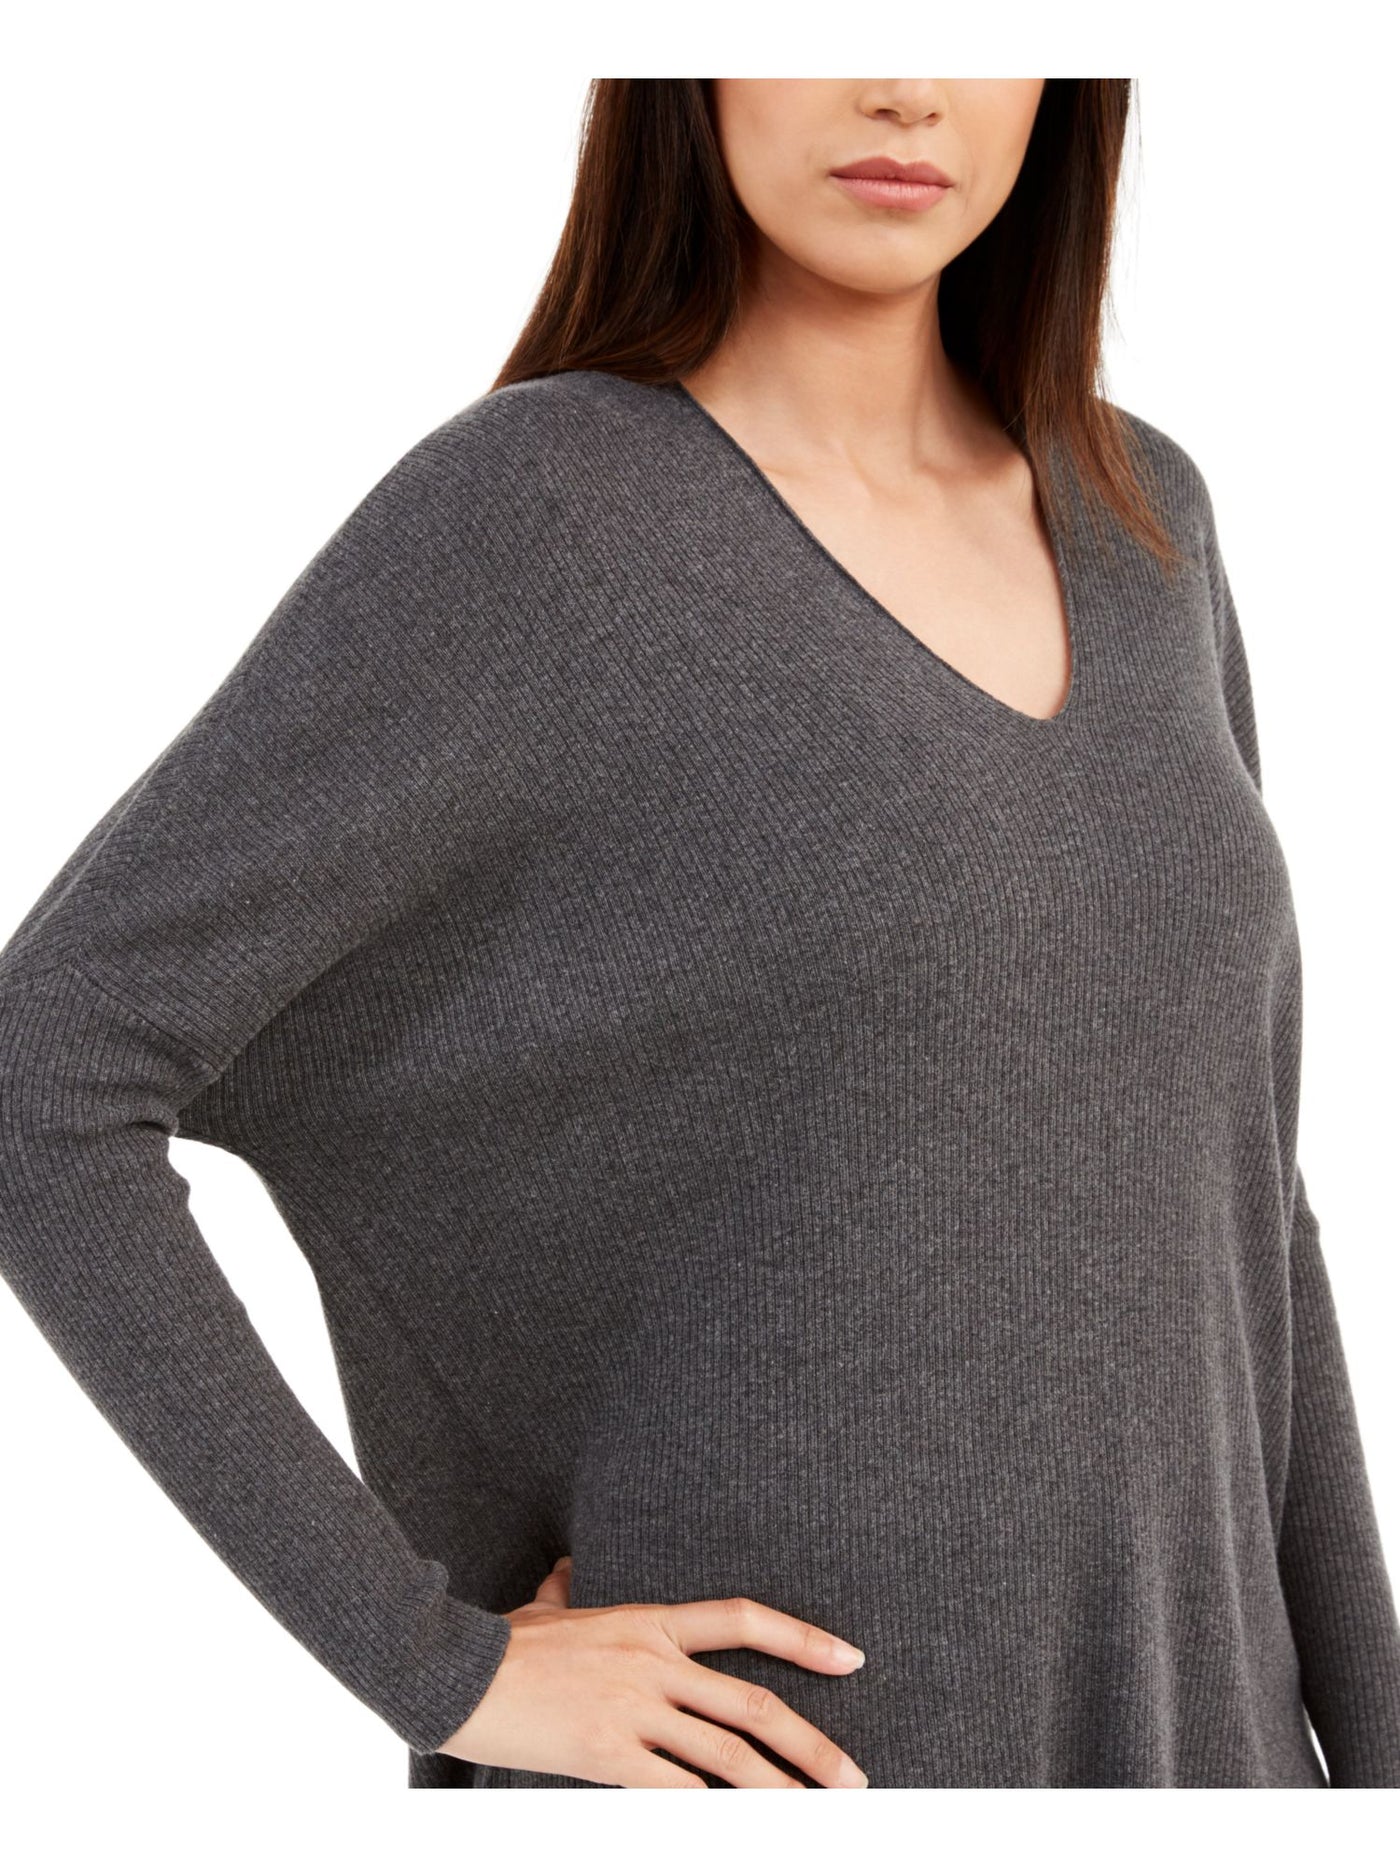 ANNE KLEIN Womens Gray Long Sleeve V Neck Top S\M